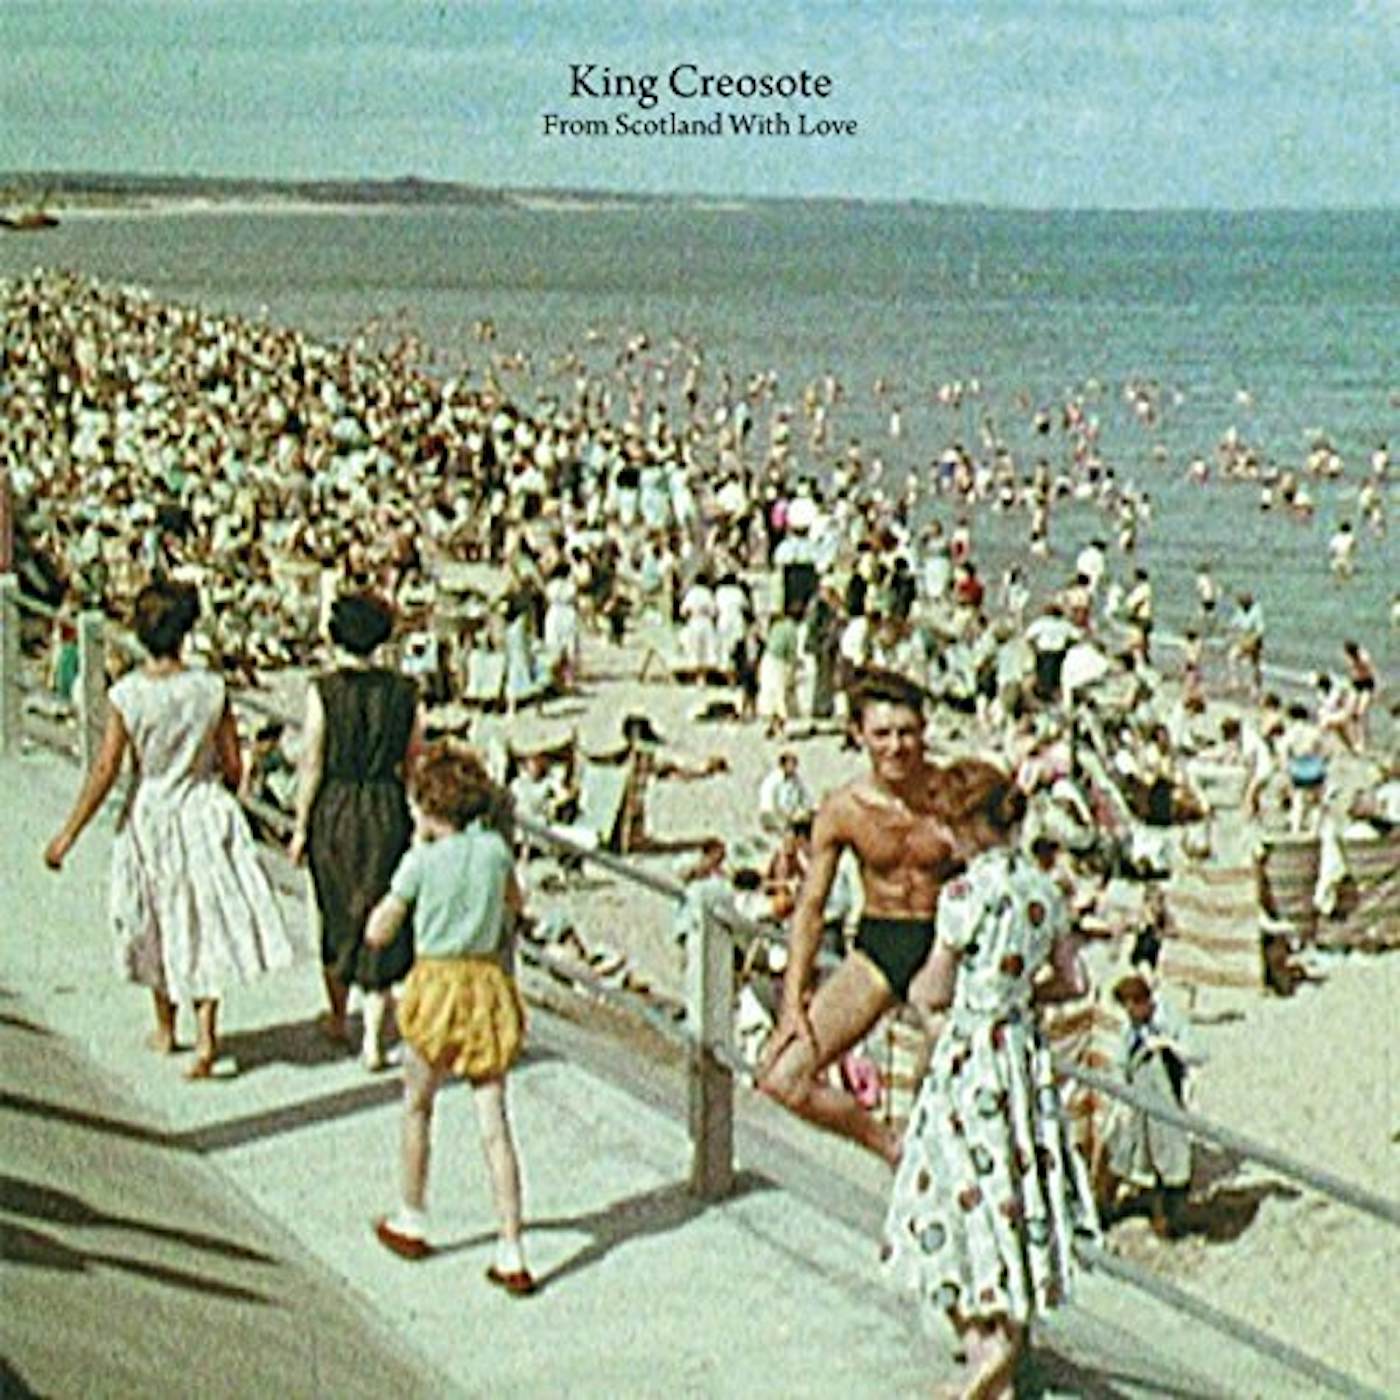 King Creosote FROM SCOTLAND WITH LOVE CD